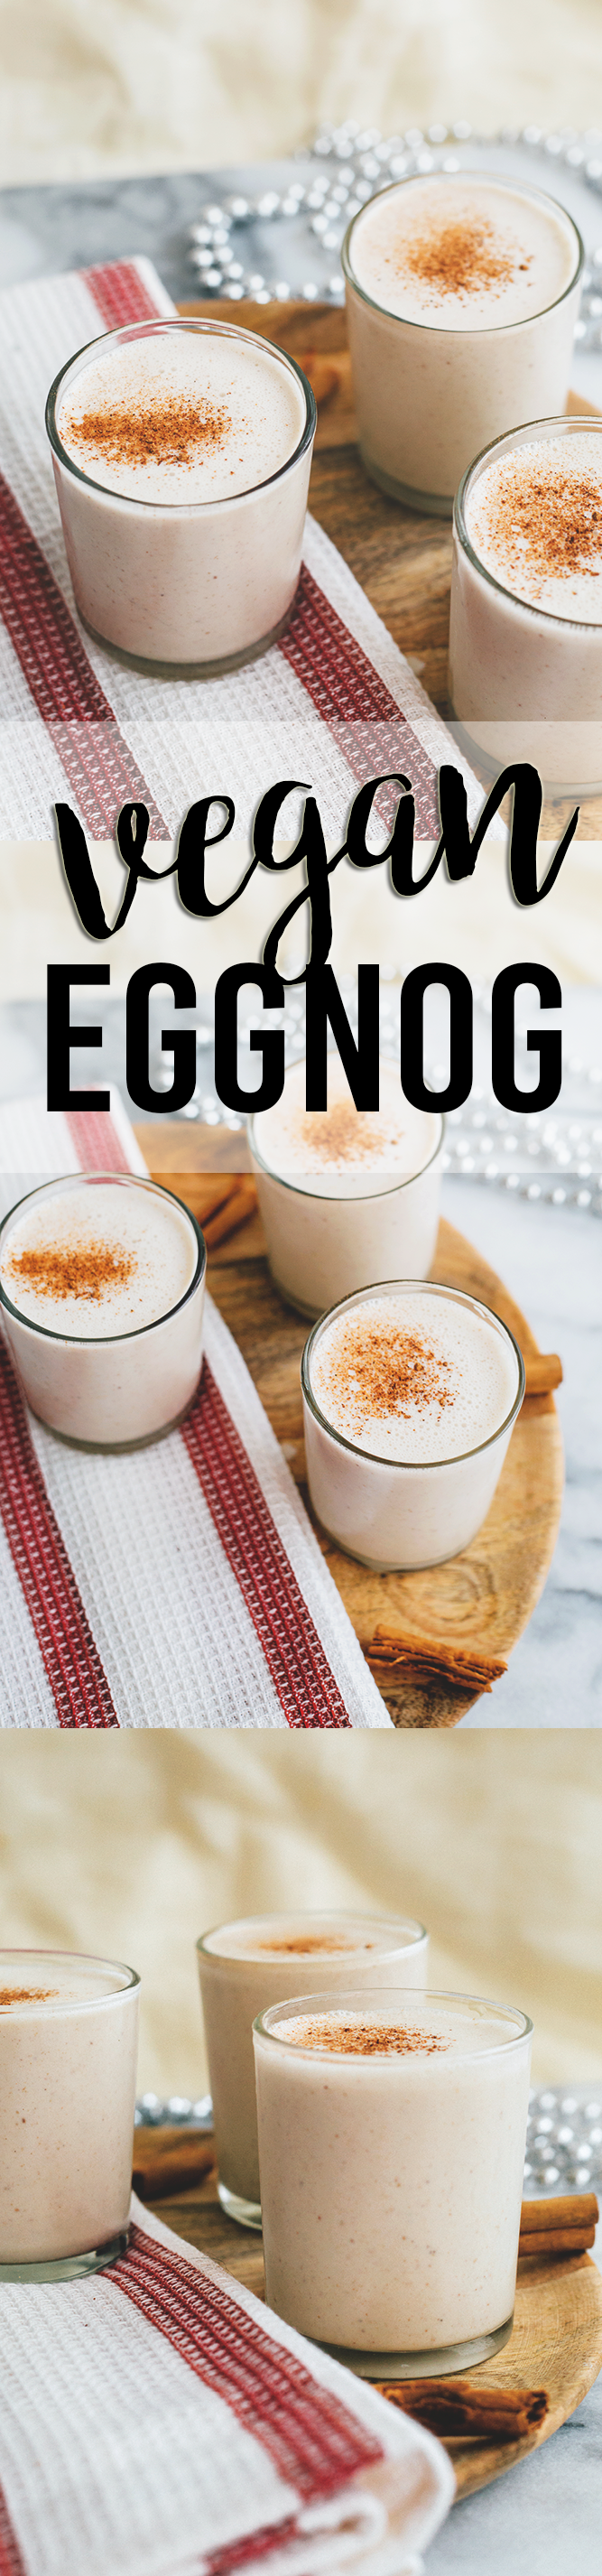 Eggnog, perfect for the Holidays!